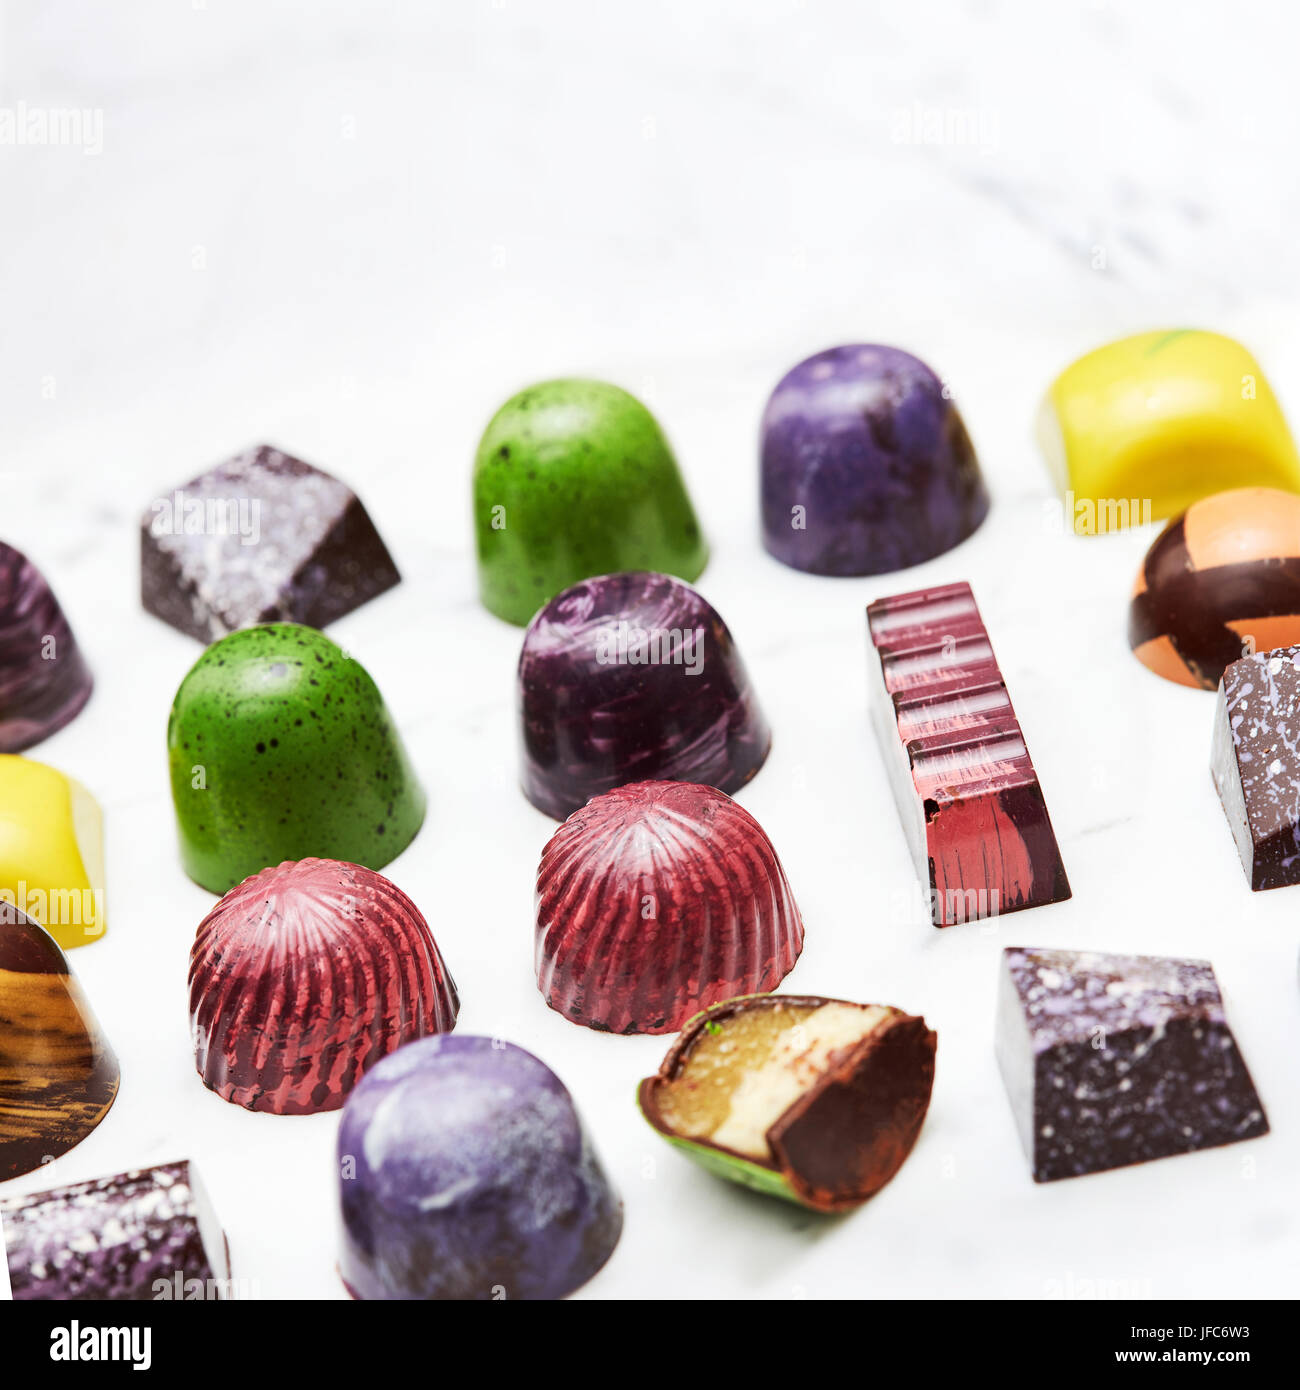 Set of various hand-made candies Stock Photo